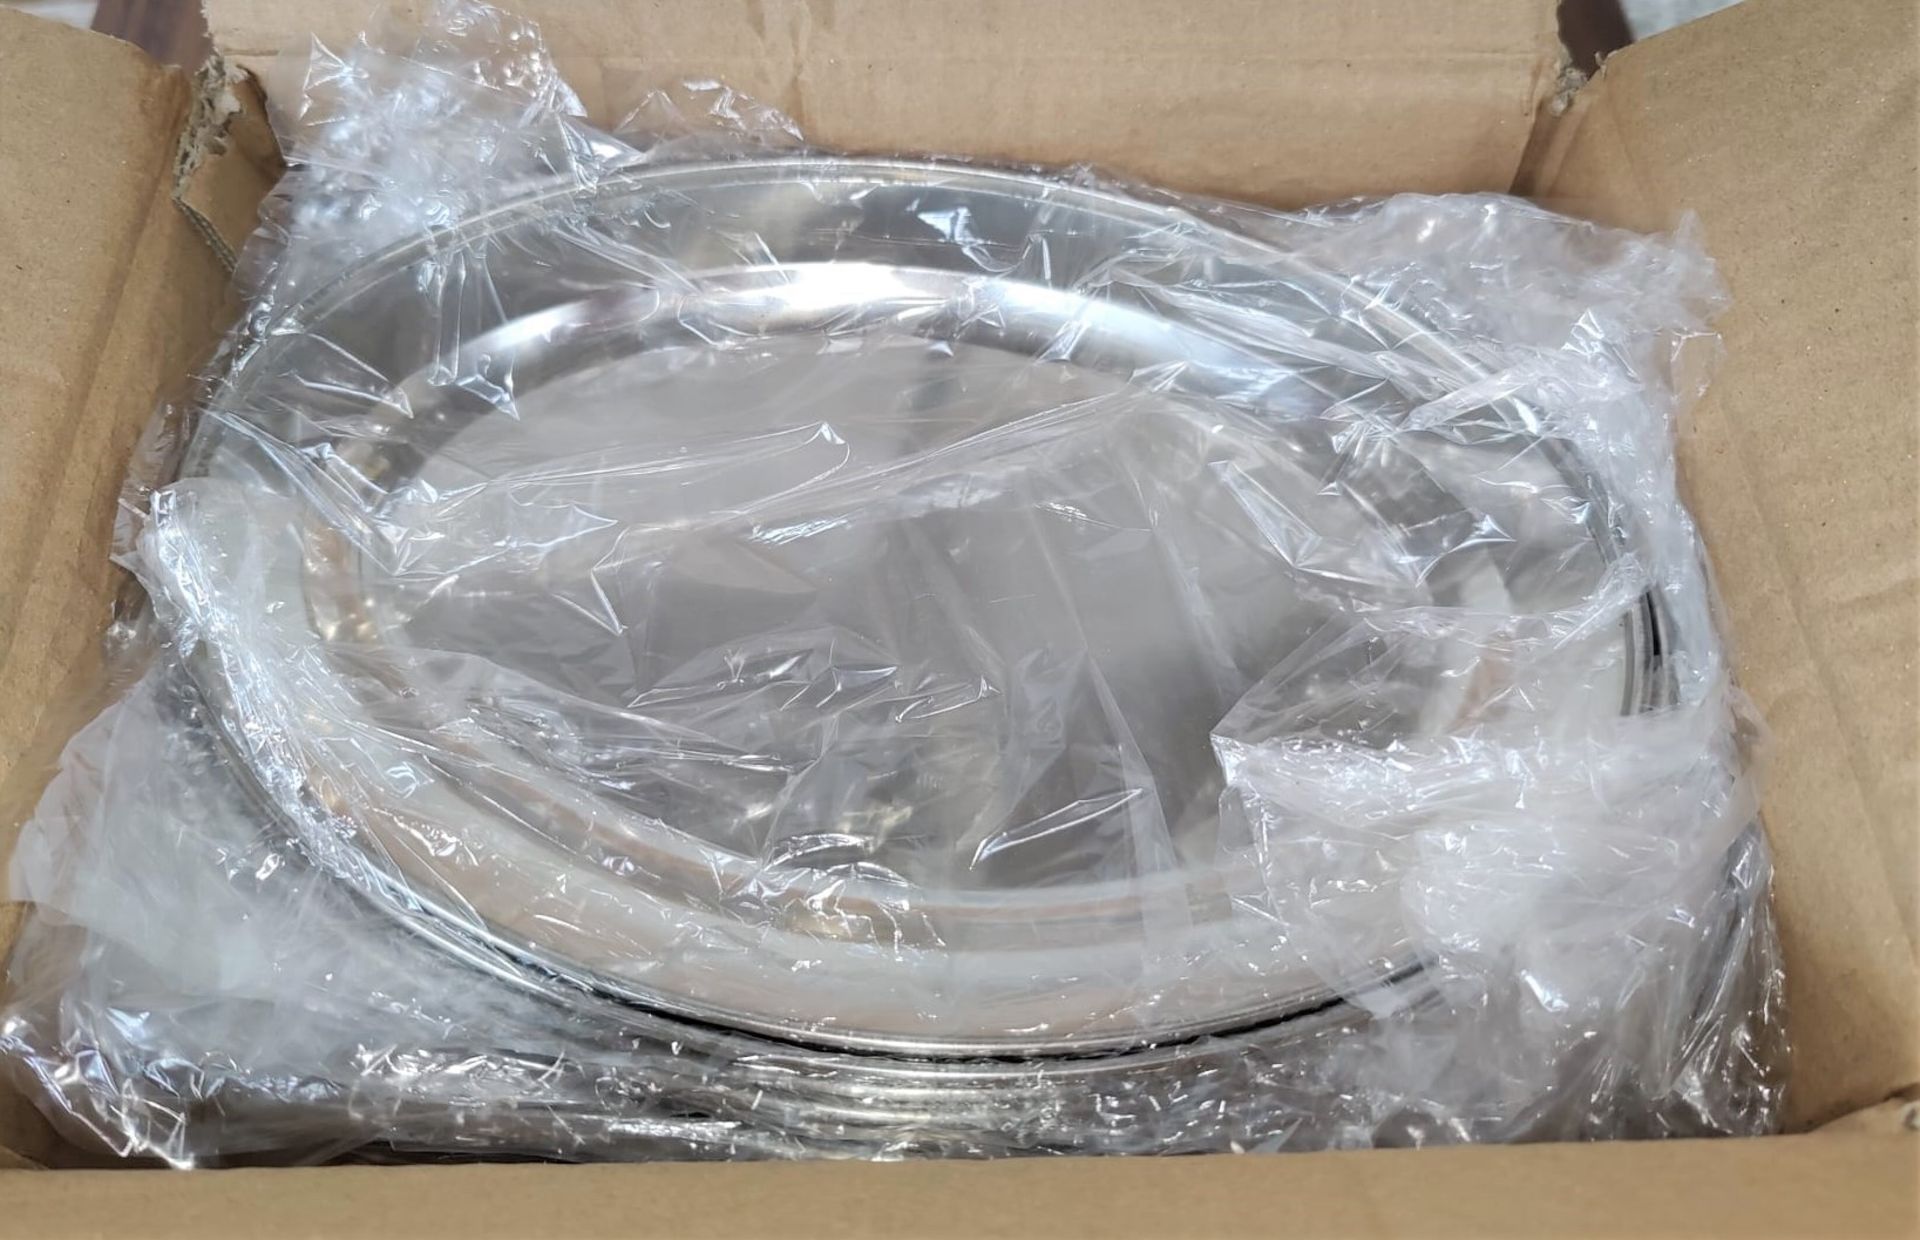 18 x Stainless Steel Small Oval Service Trays - Size: 255mm x 180mm - Brand New Boxed Stock RRP £90 - Image 2 of 8